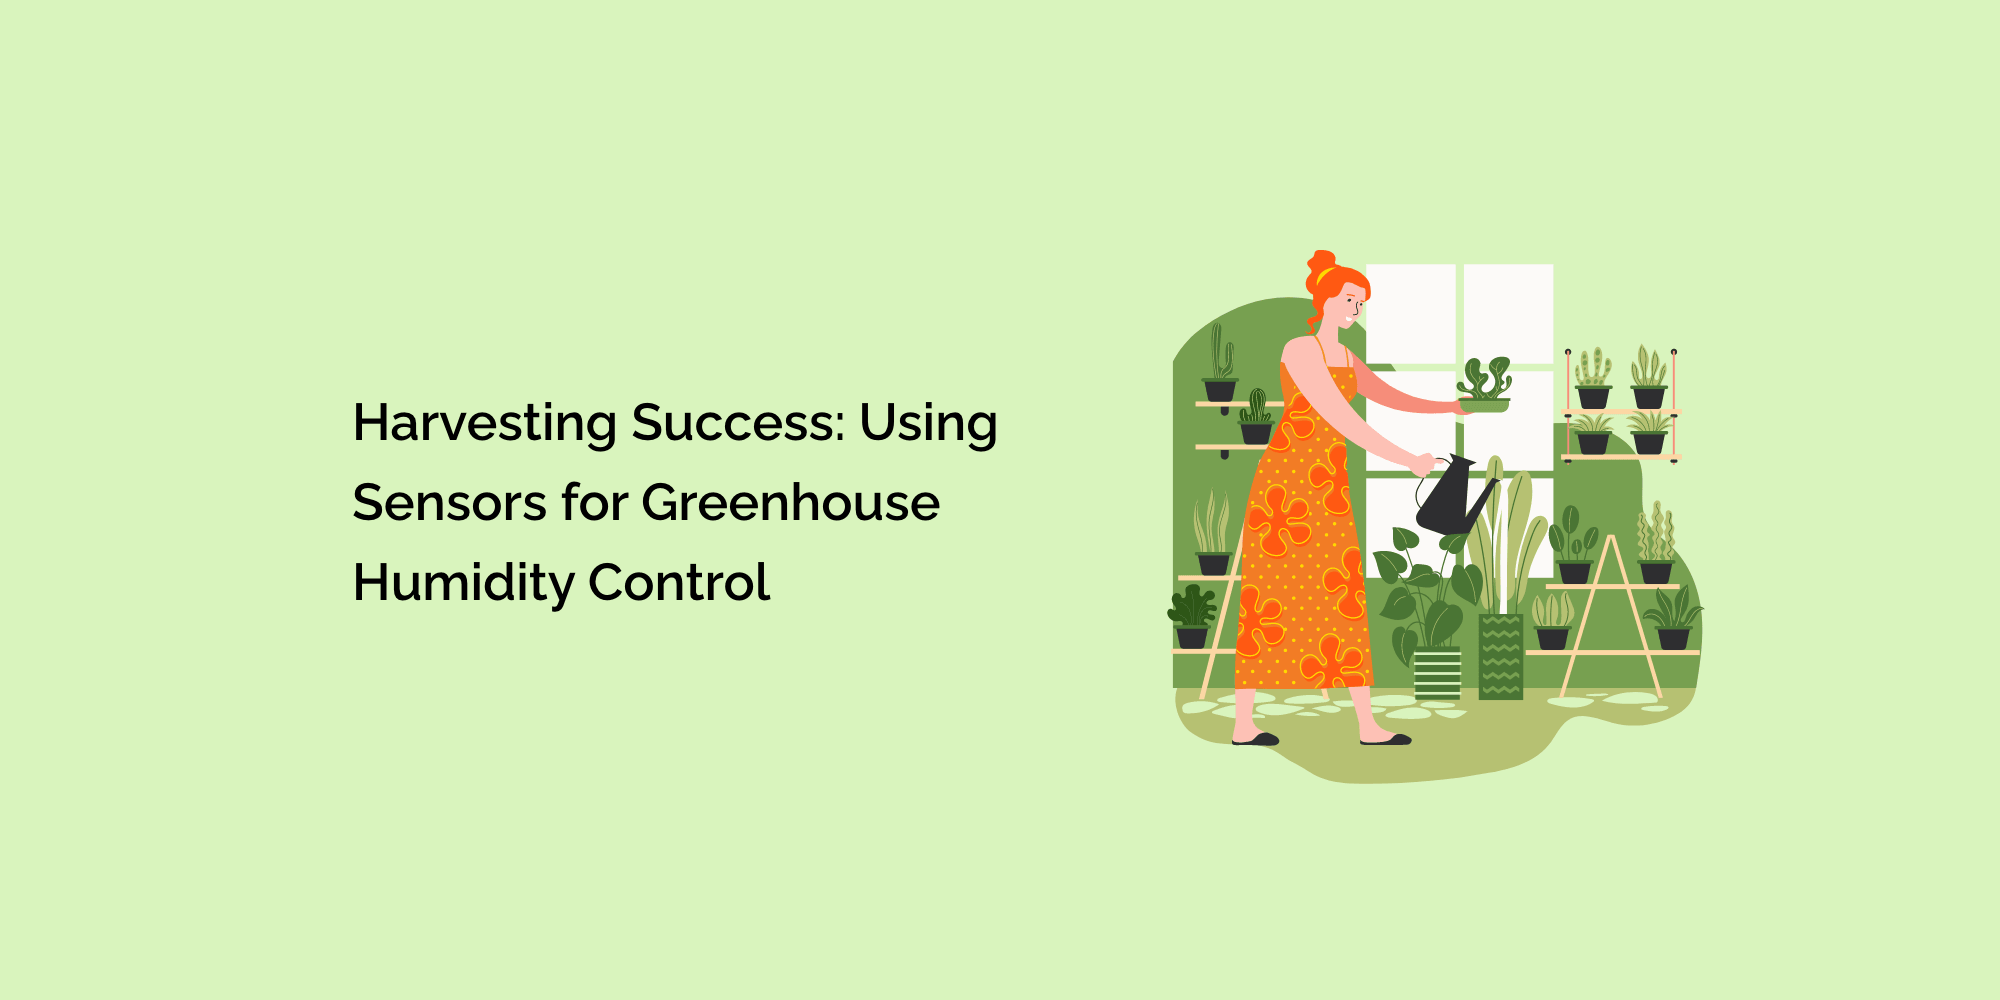 Harvesting Success: Using Sensors for Greenhouse Humidity Control